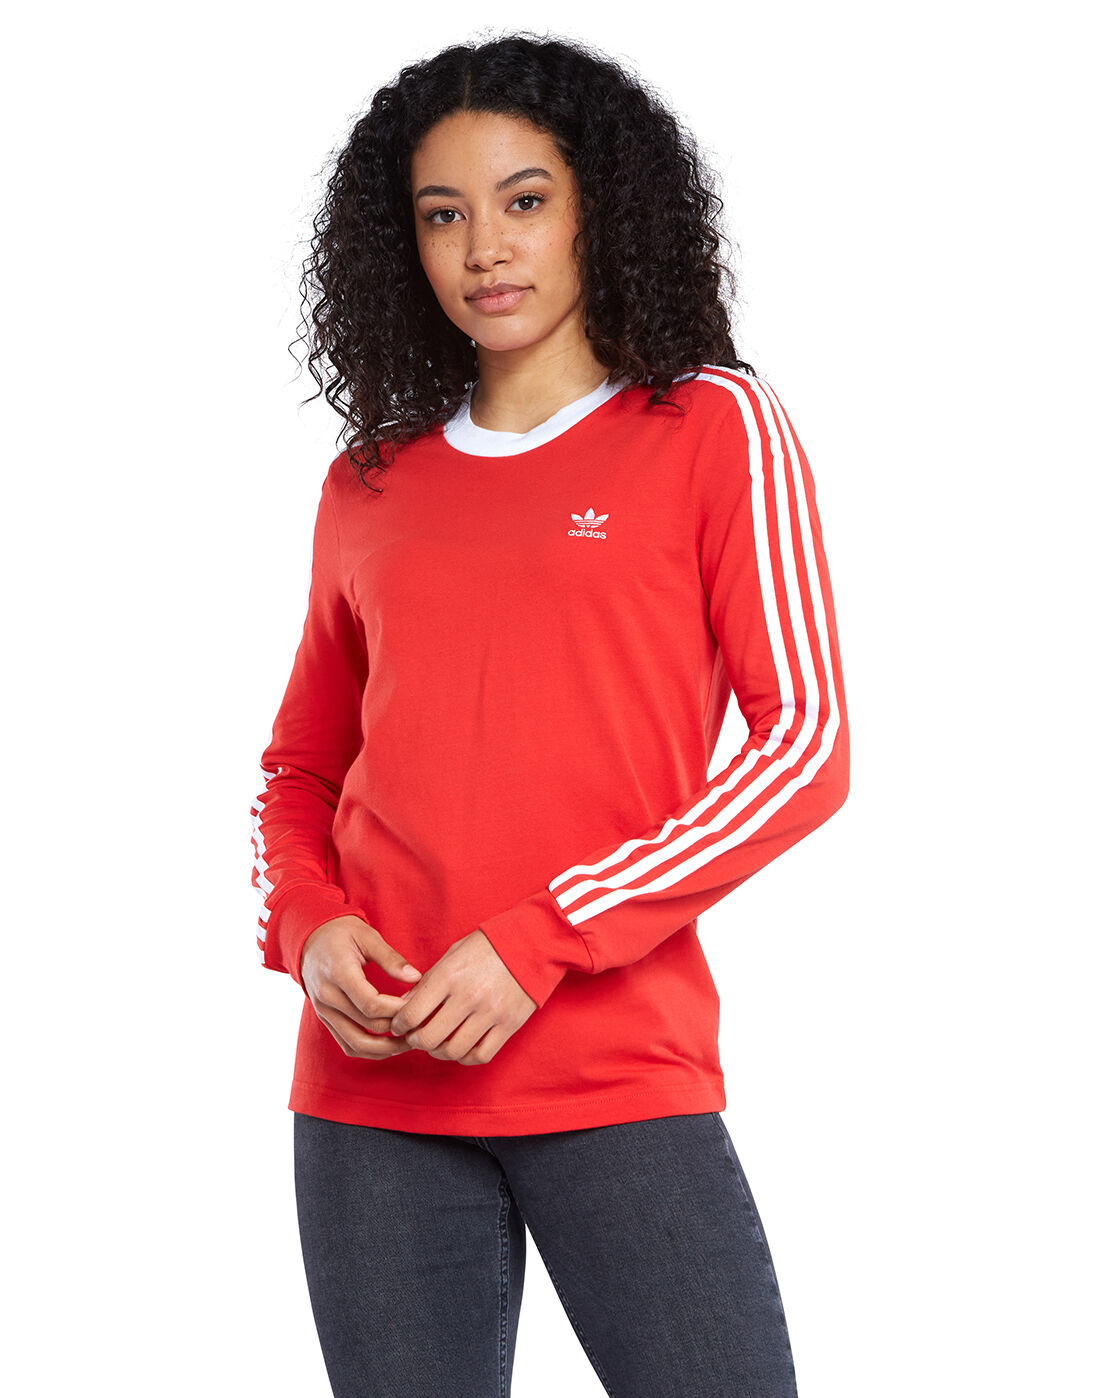 red adidas top womens